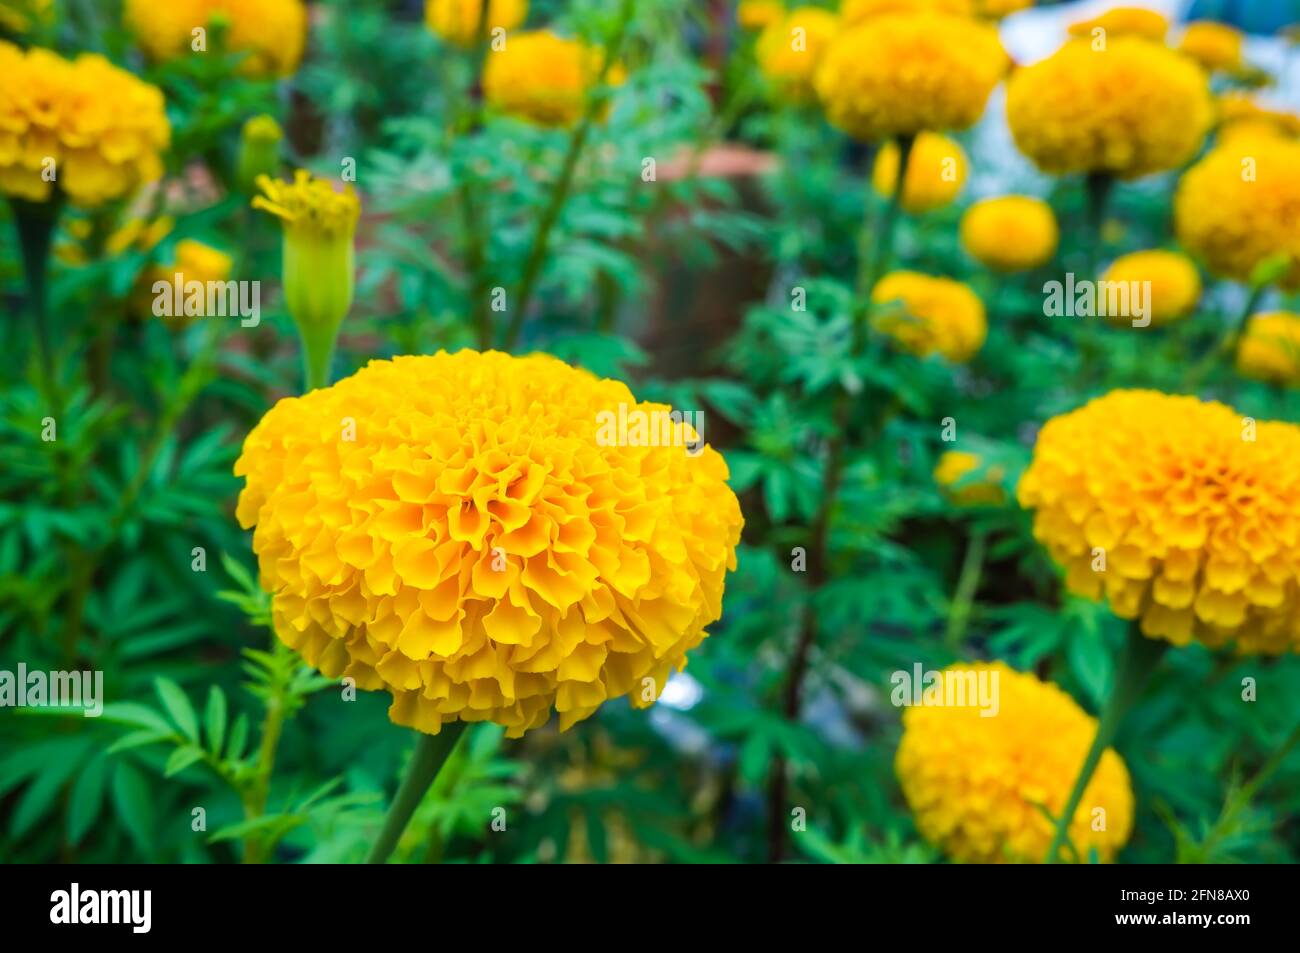 Beautiful yellow luxuriantly blooming marigolds flowers with leaves growing in the garden. Flower bed with bright sunlight. Outdoor at the daytime. Se Stock Photo